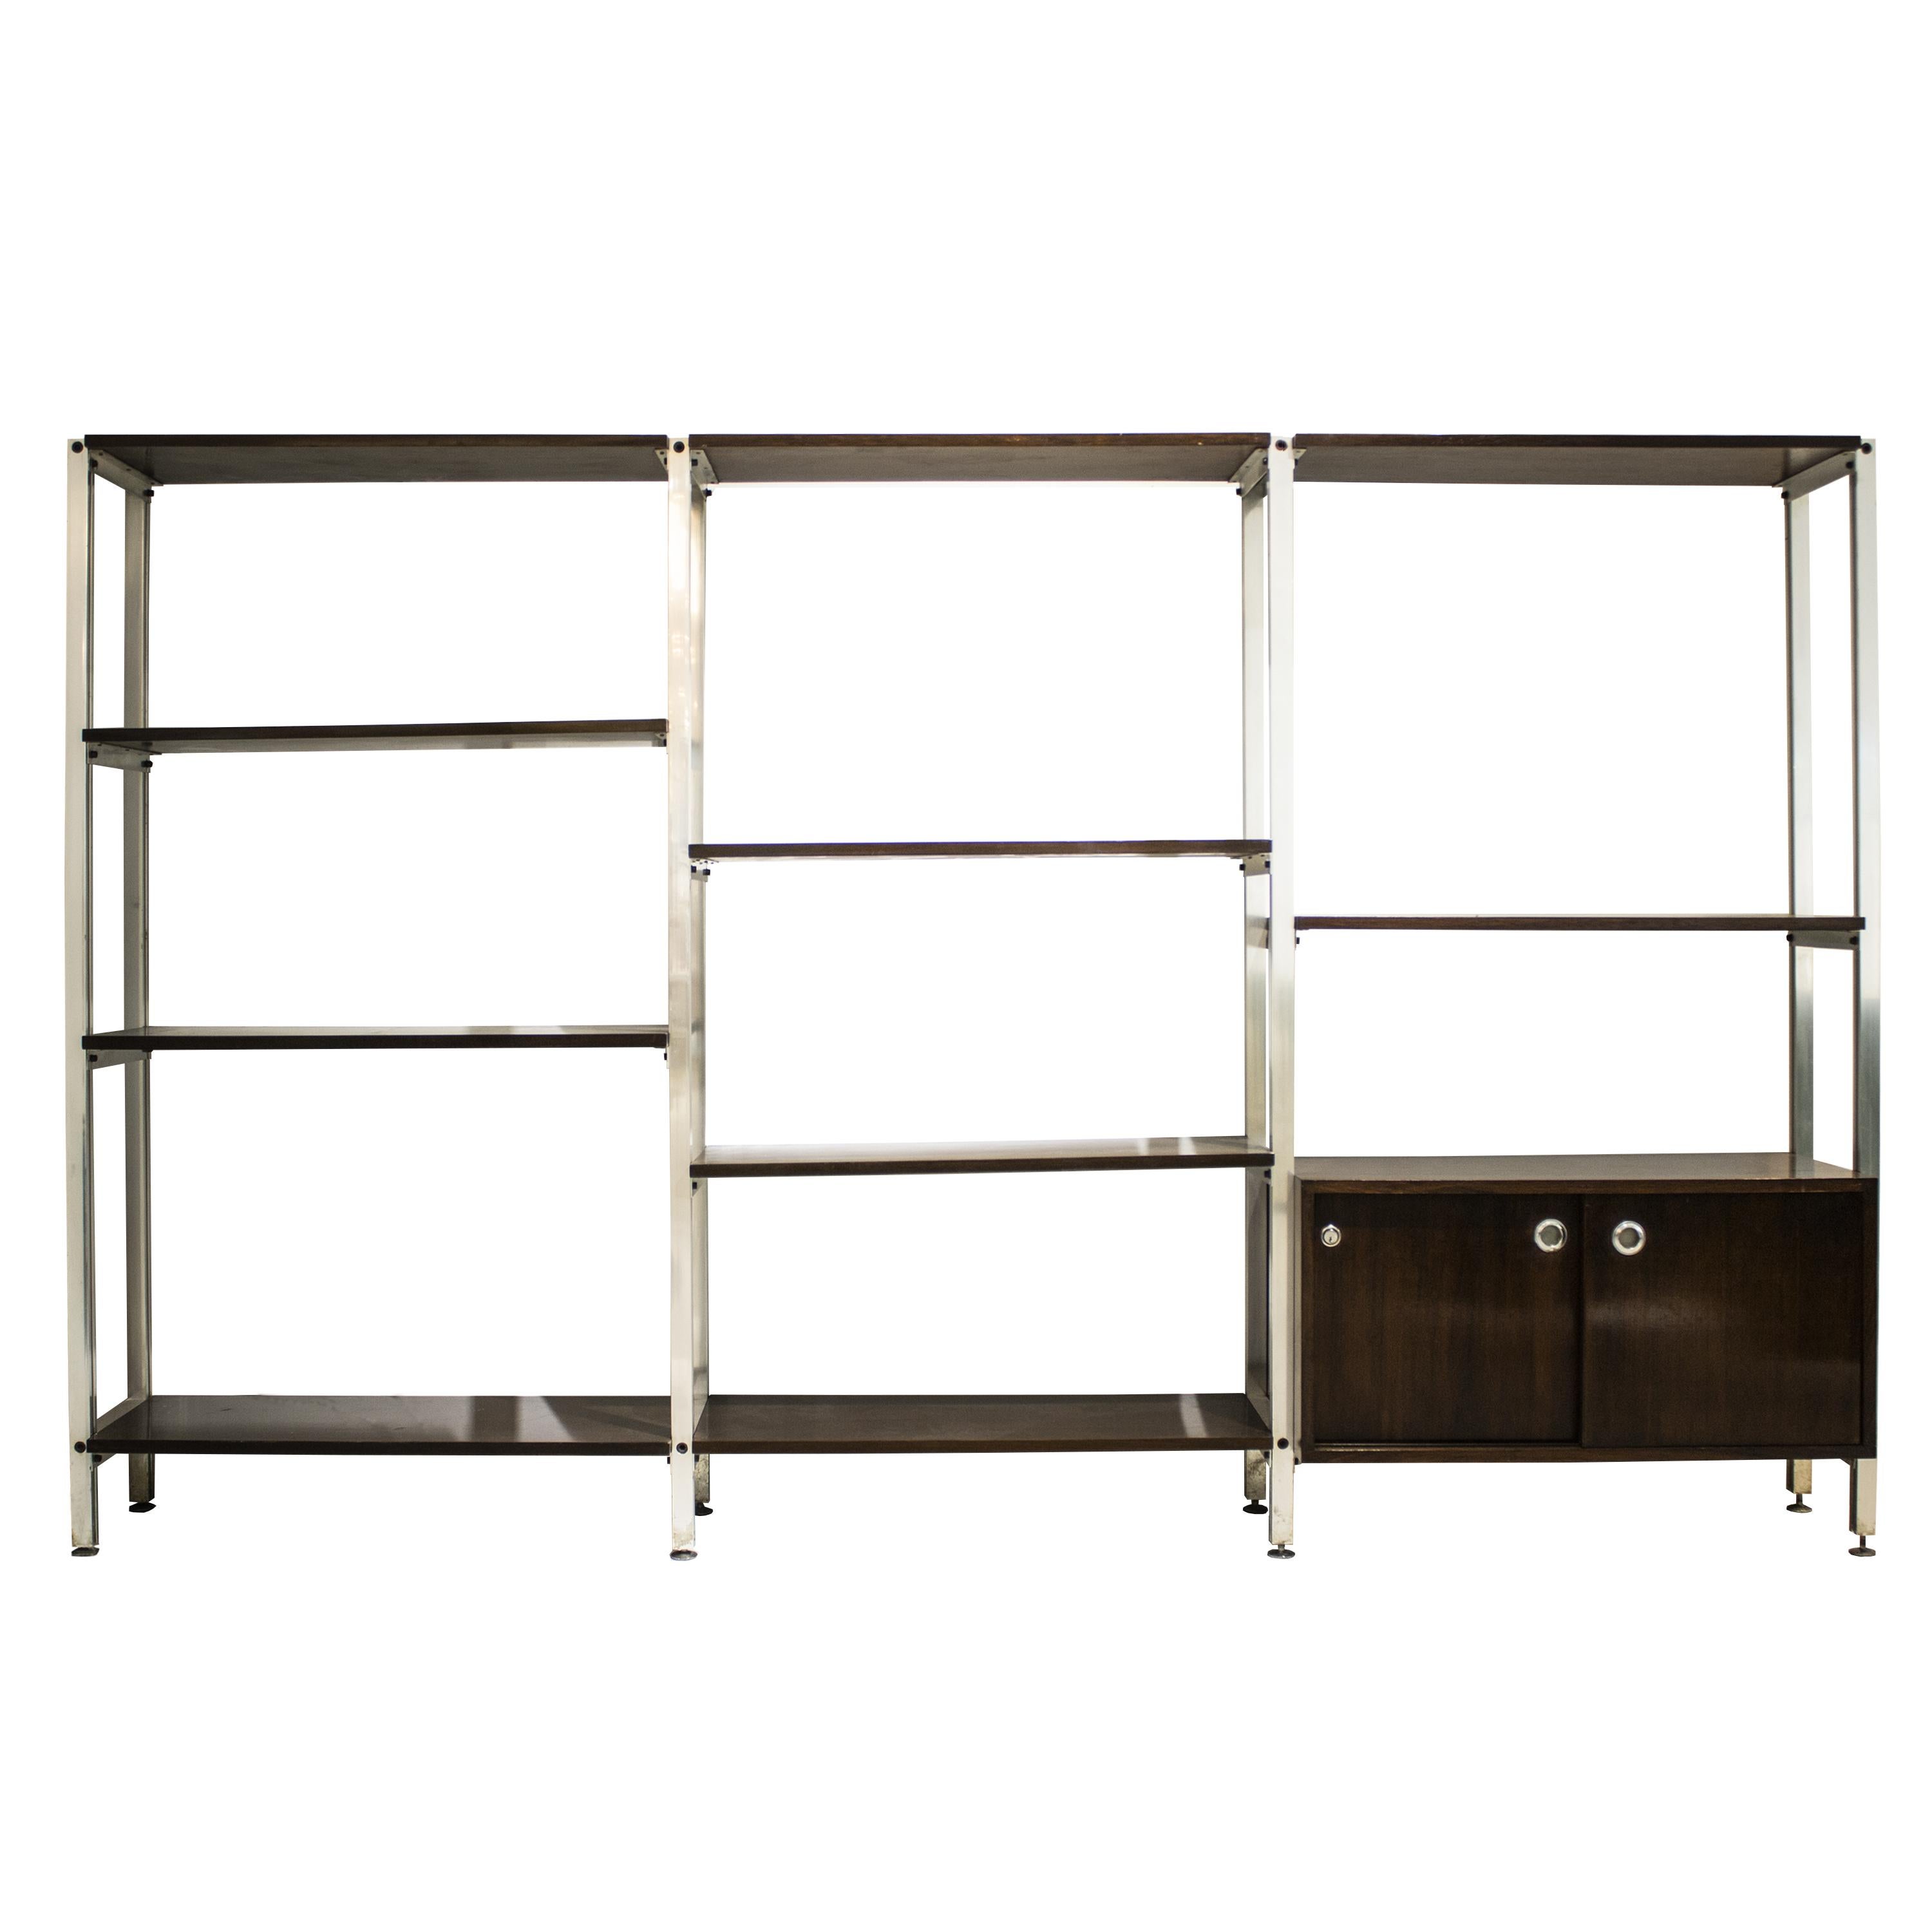 Office modular shelf edited by ICF Padova in the 1970s. Is composed of 3 modules with height adjustable steel structure, with teak shelves and one storage module with sliding doors.